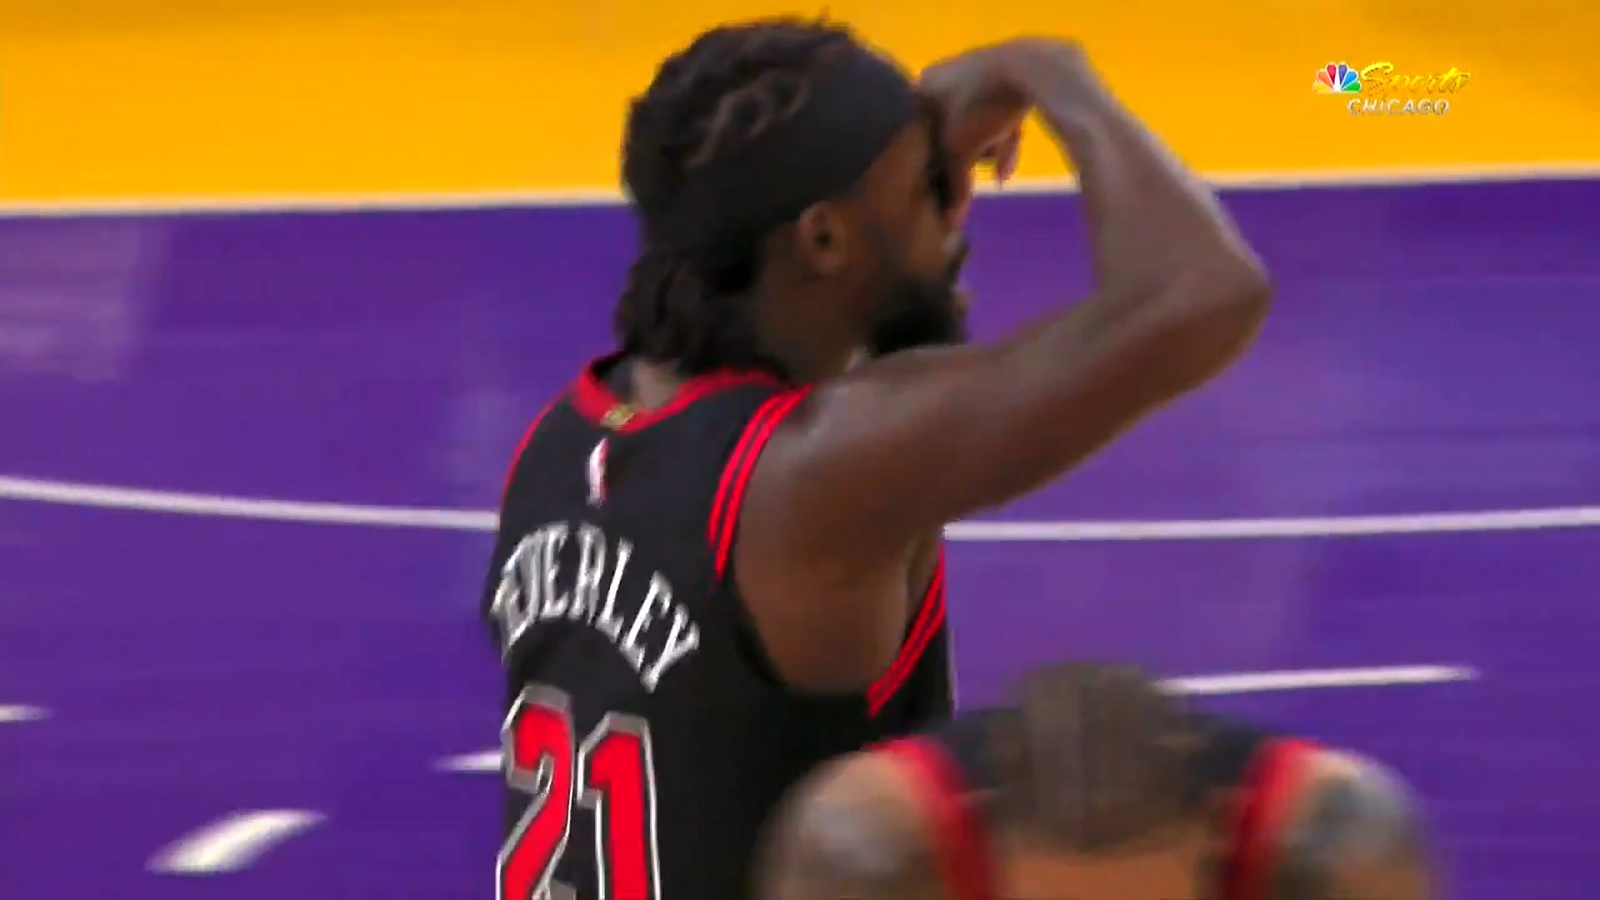 WATCH: Beverley buries James, Lakers, with 'too small' taunt